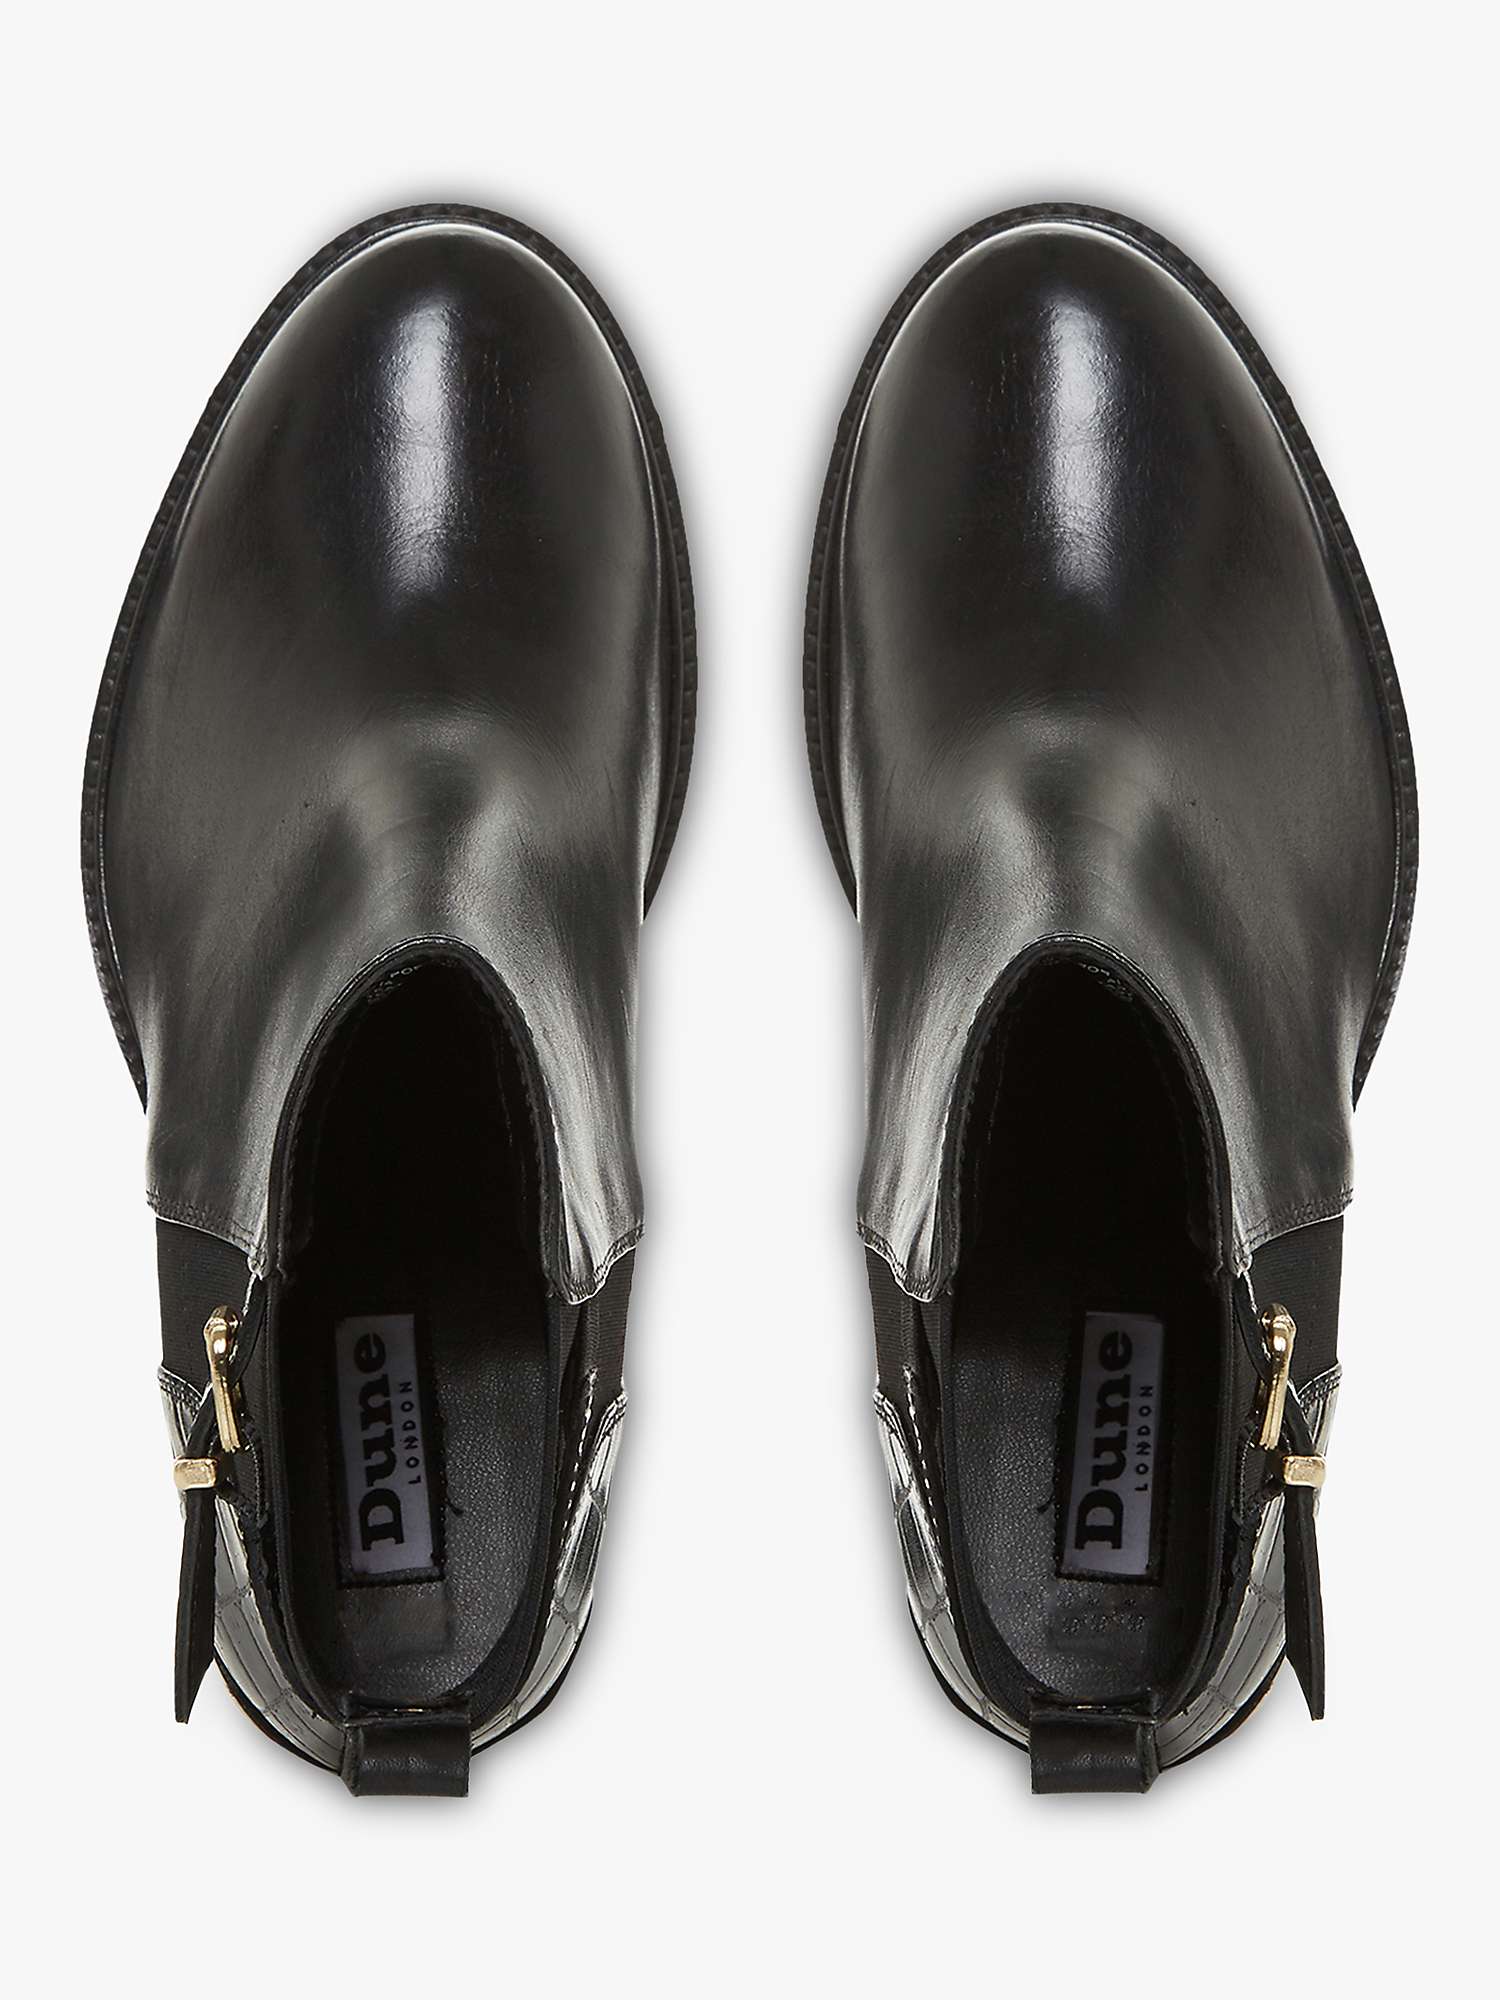 Dune Poetics Leather Ankle Boots, Black at John Lewis & Partners